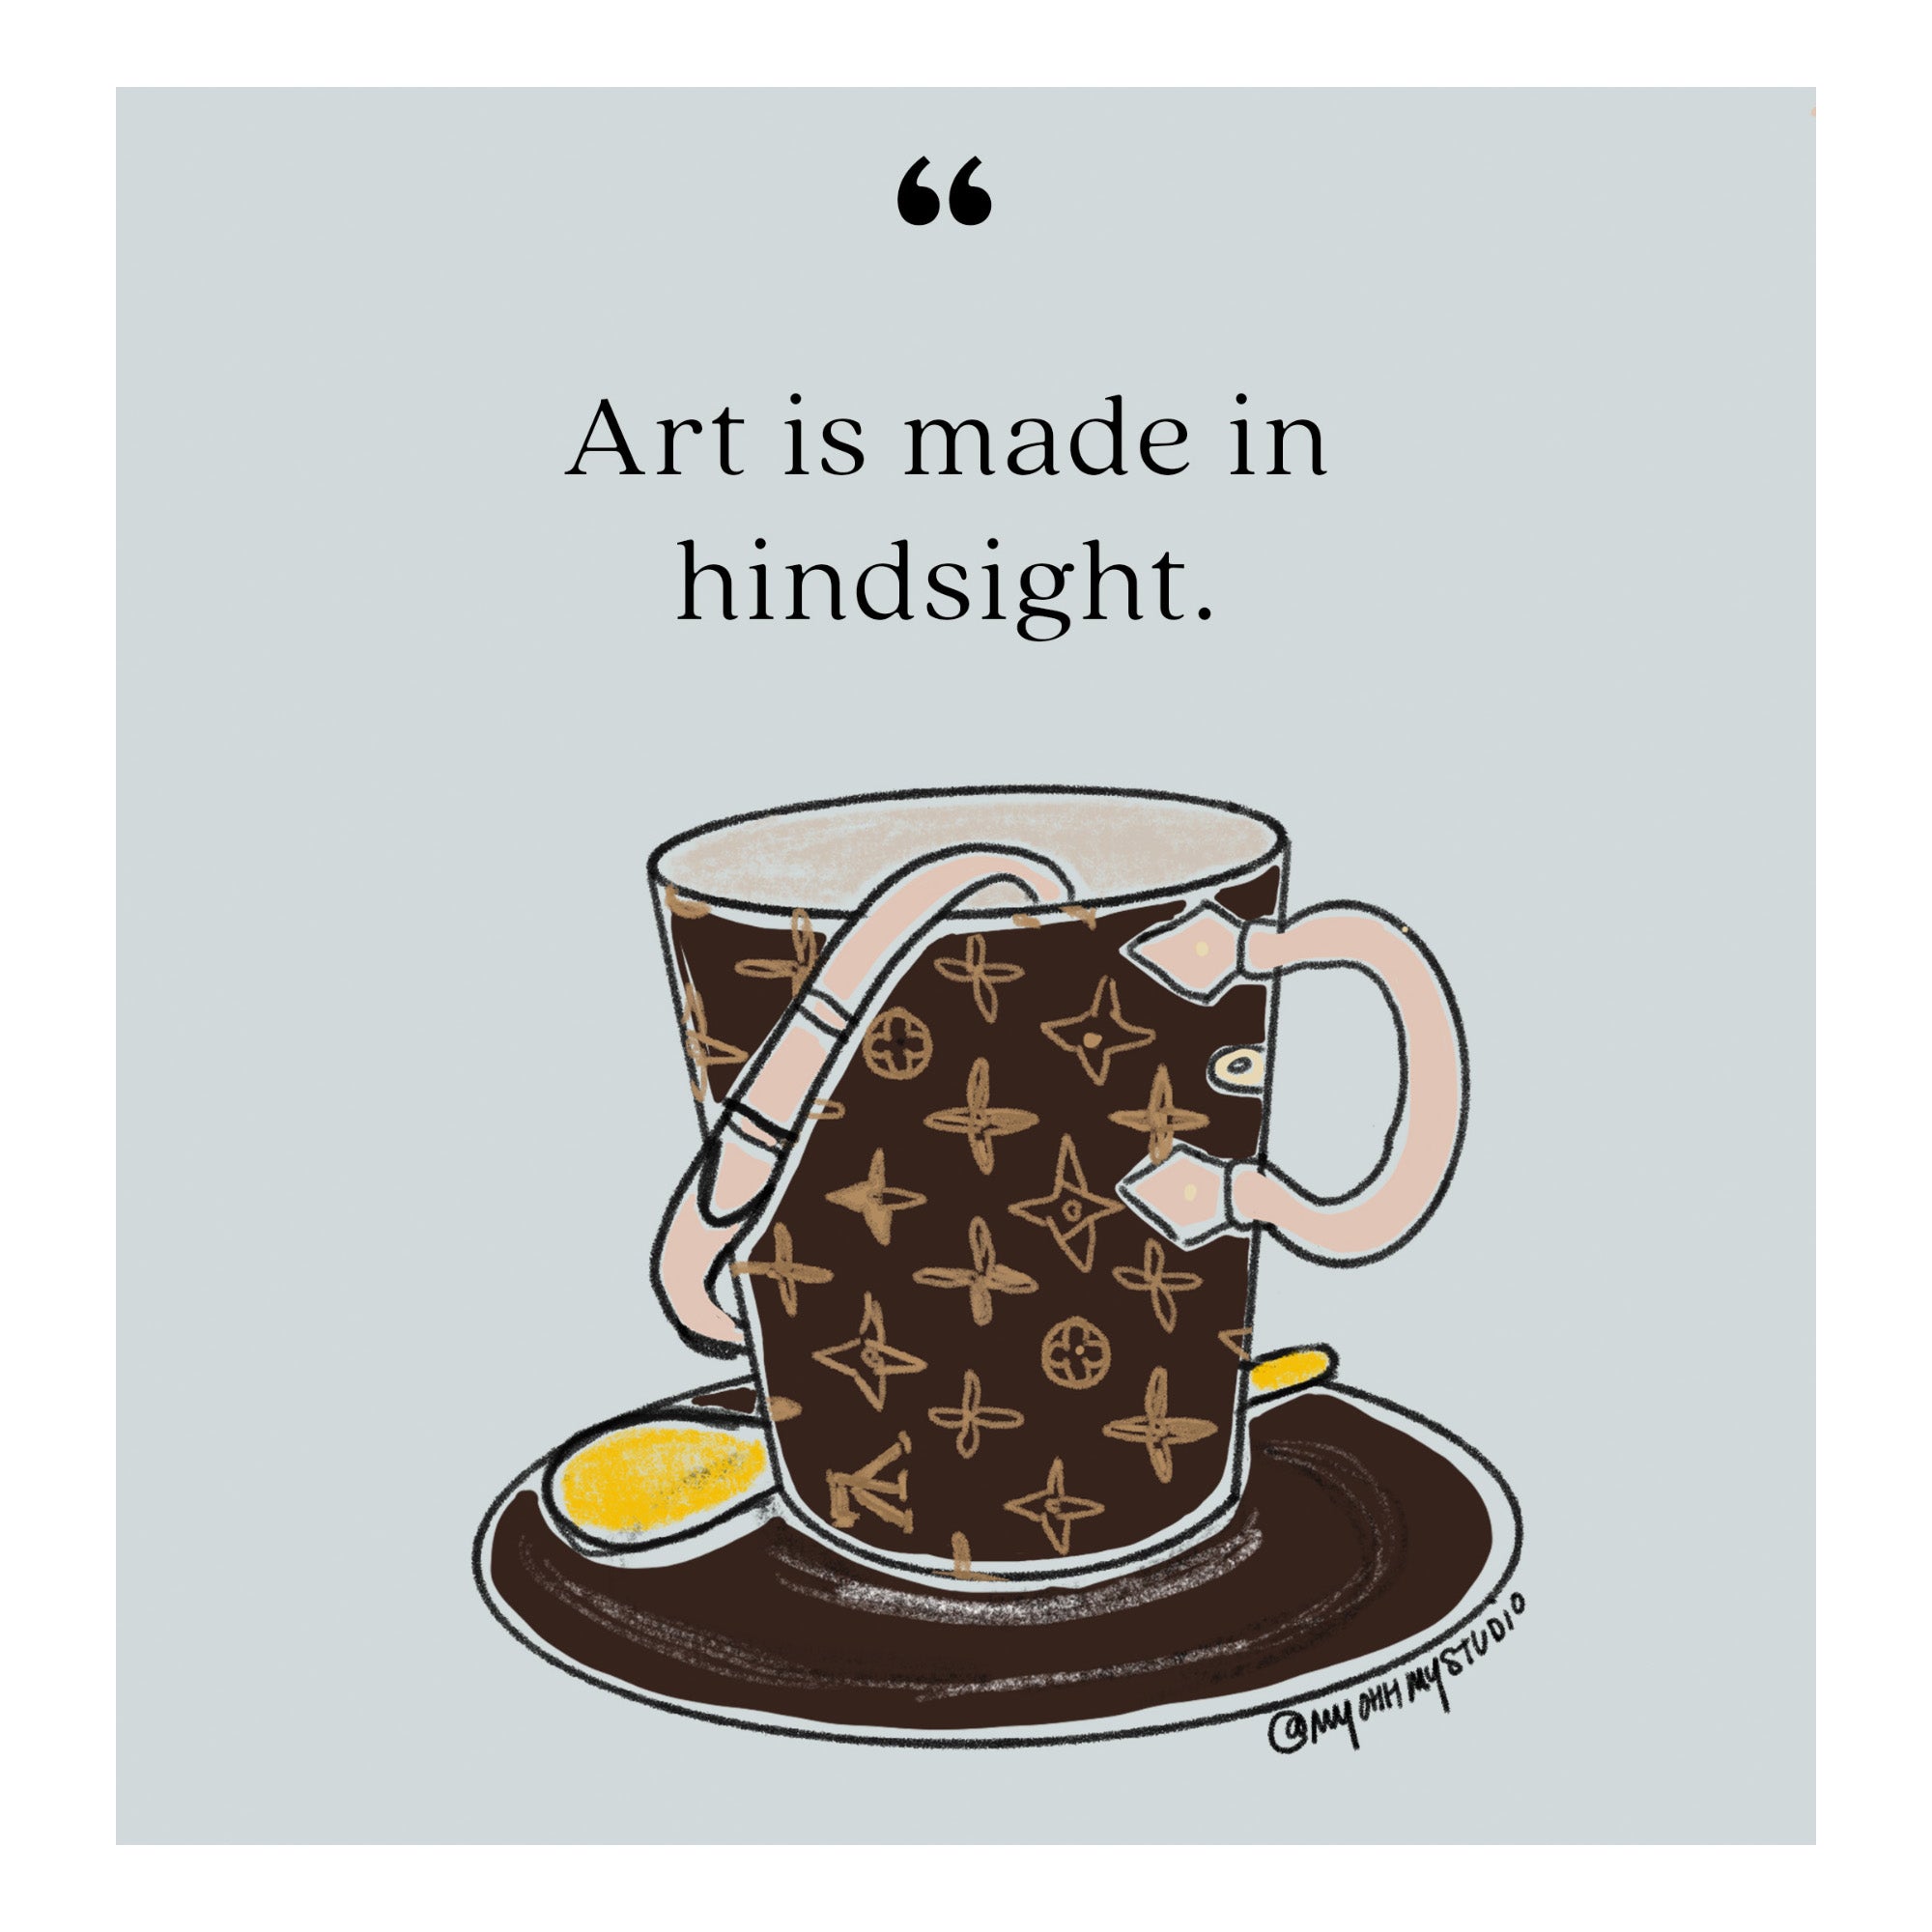 "Art is made in hindsight" Print